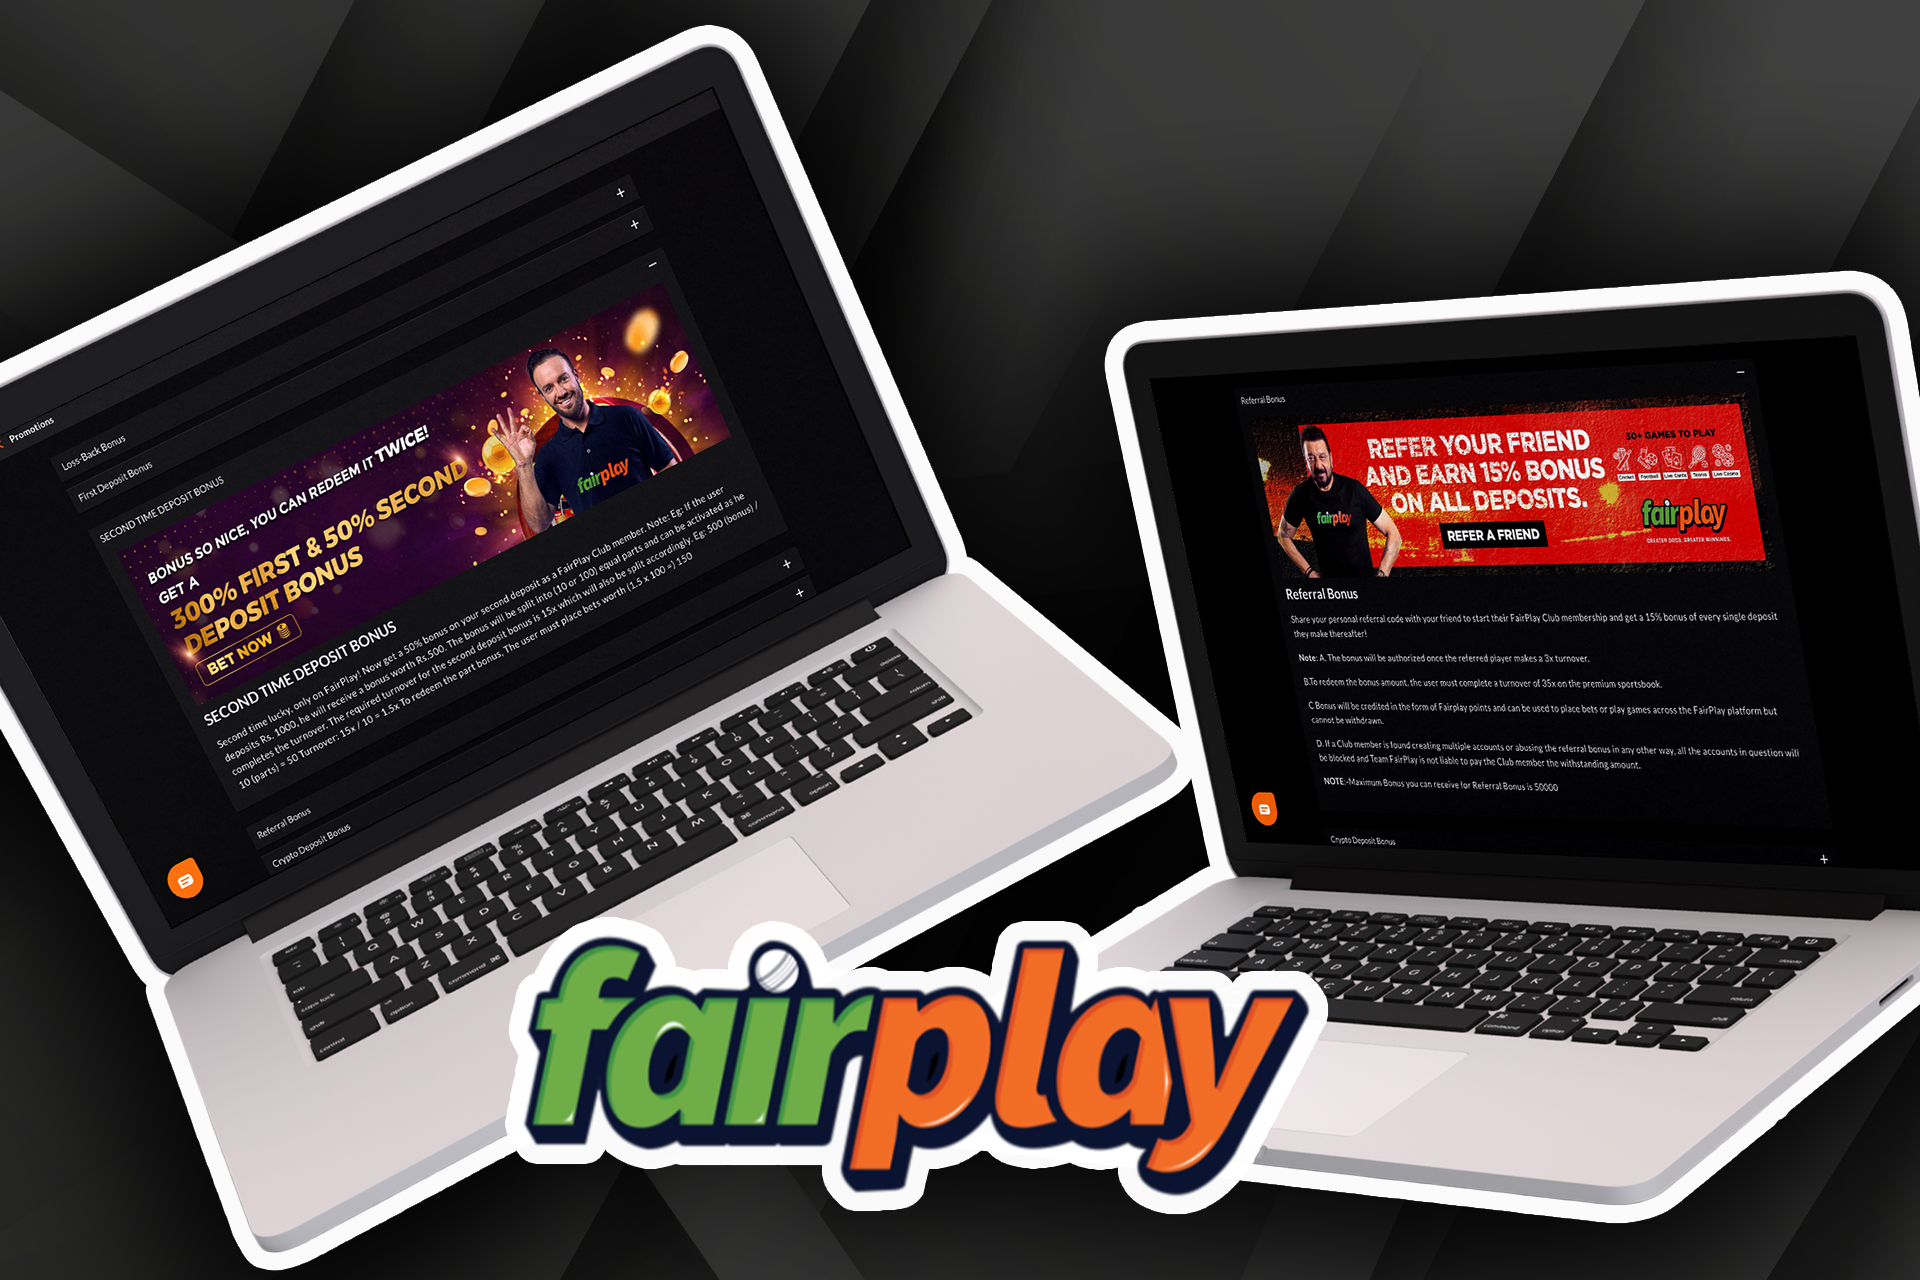 You can also receive other bonuses and participate in different promotions on Fairplay.